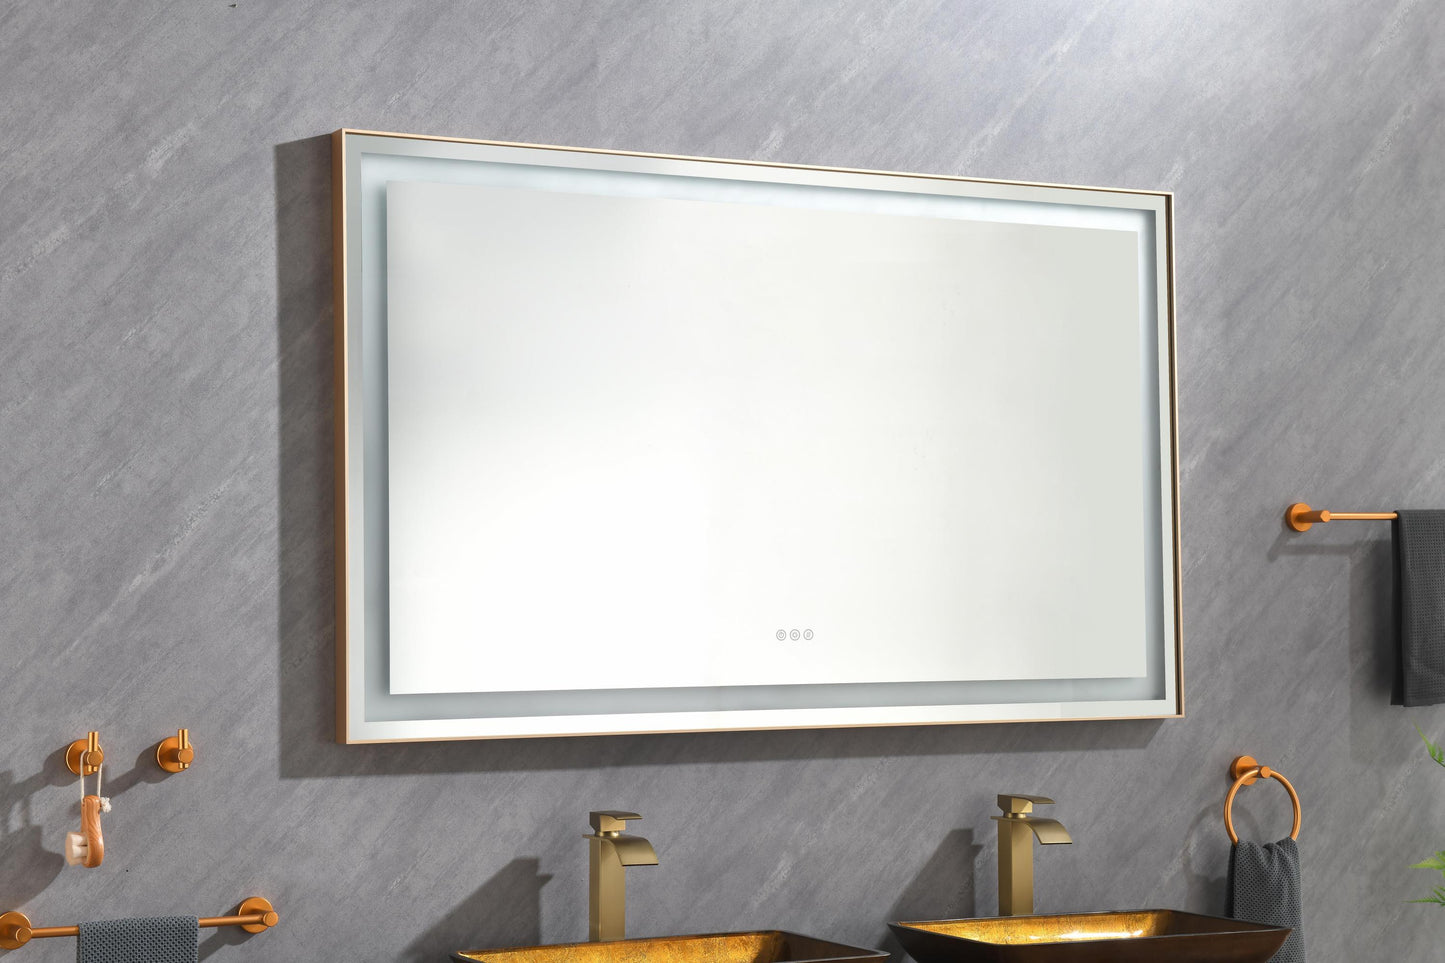 LTL needs to consult the warehouse address60*36 LED Lighted Bathroom Wall Mounted Mirror with High Lumen+Anti-Fog Separately Control